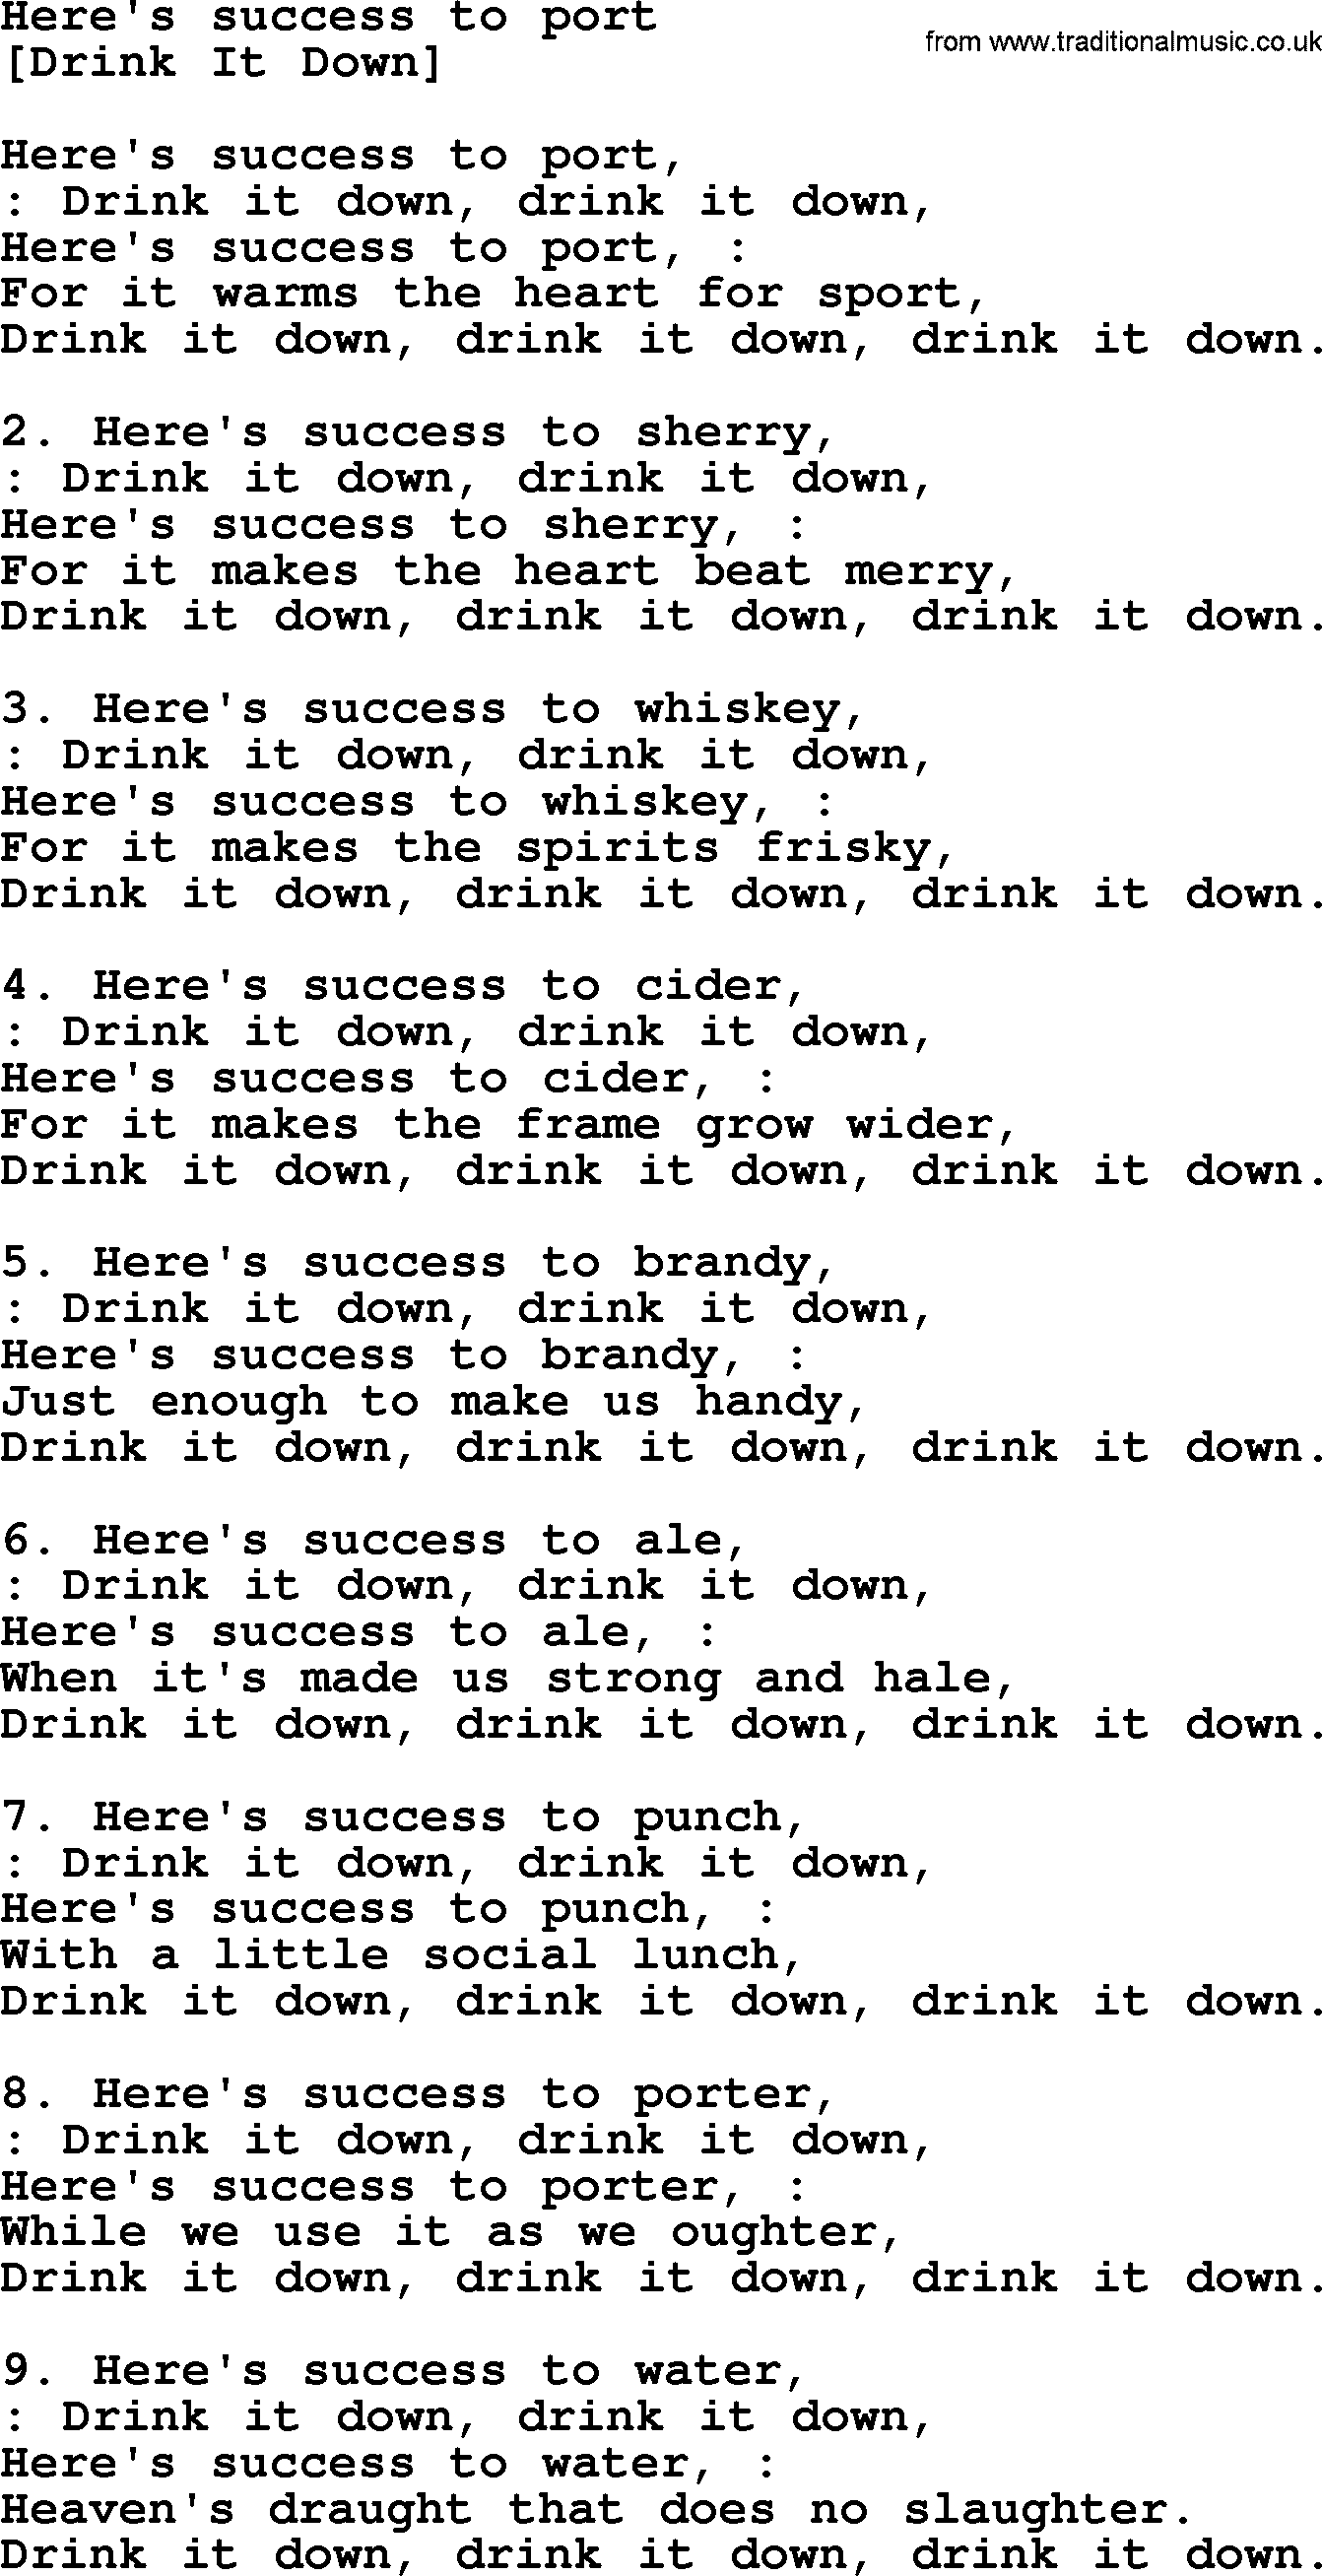 Old American Song: Here's Success To Port, lyrics